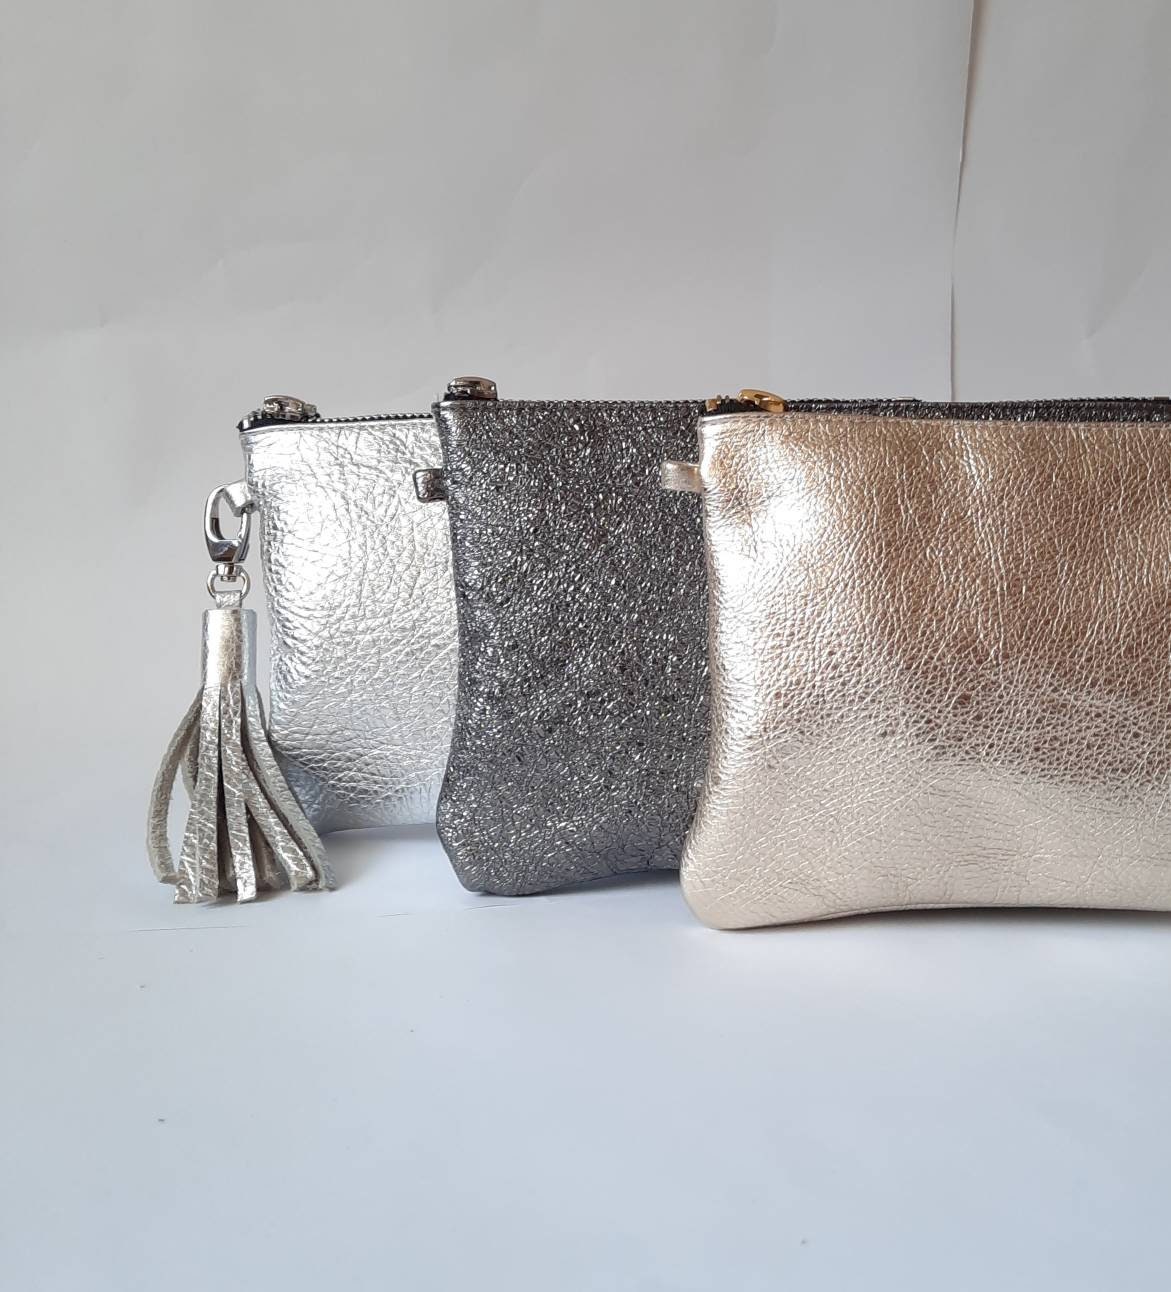 Bottega Veneta Fountain silver- The Pouch Leather Clutch Small – Once Only